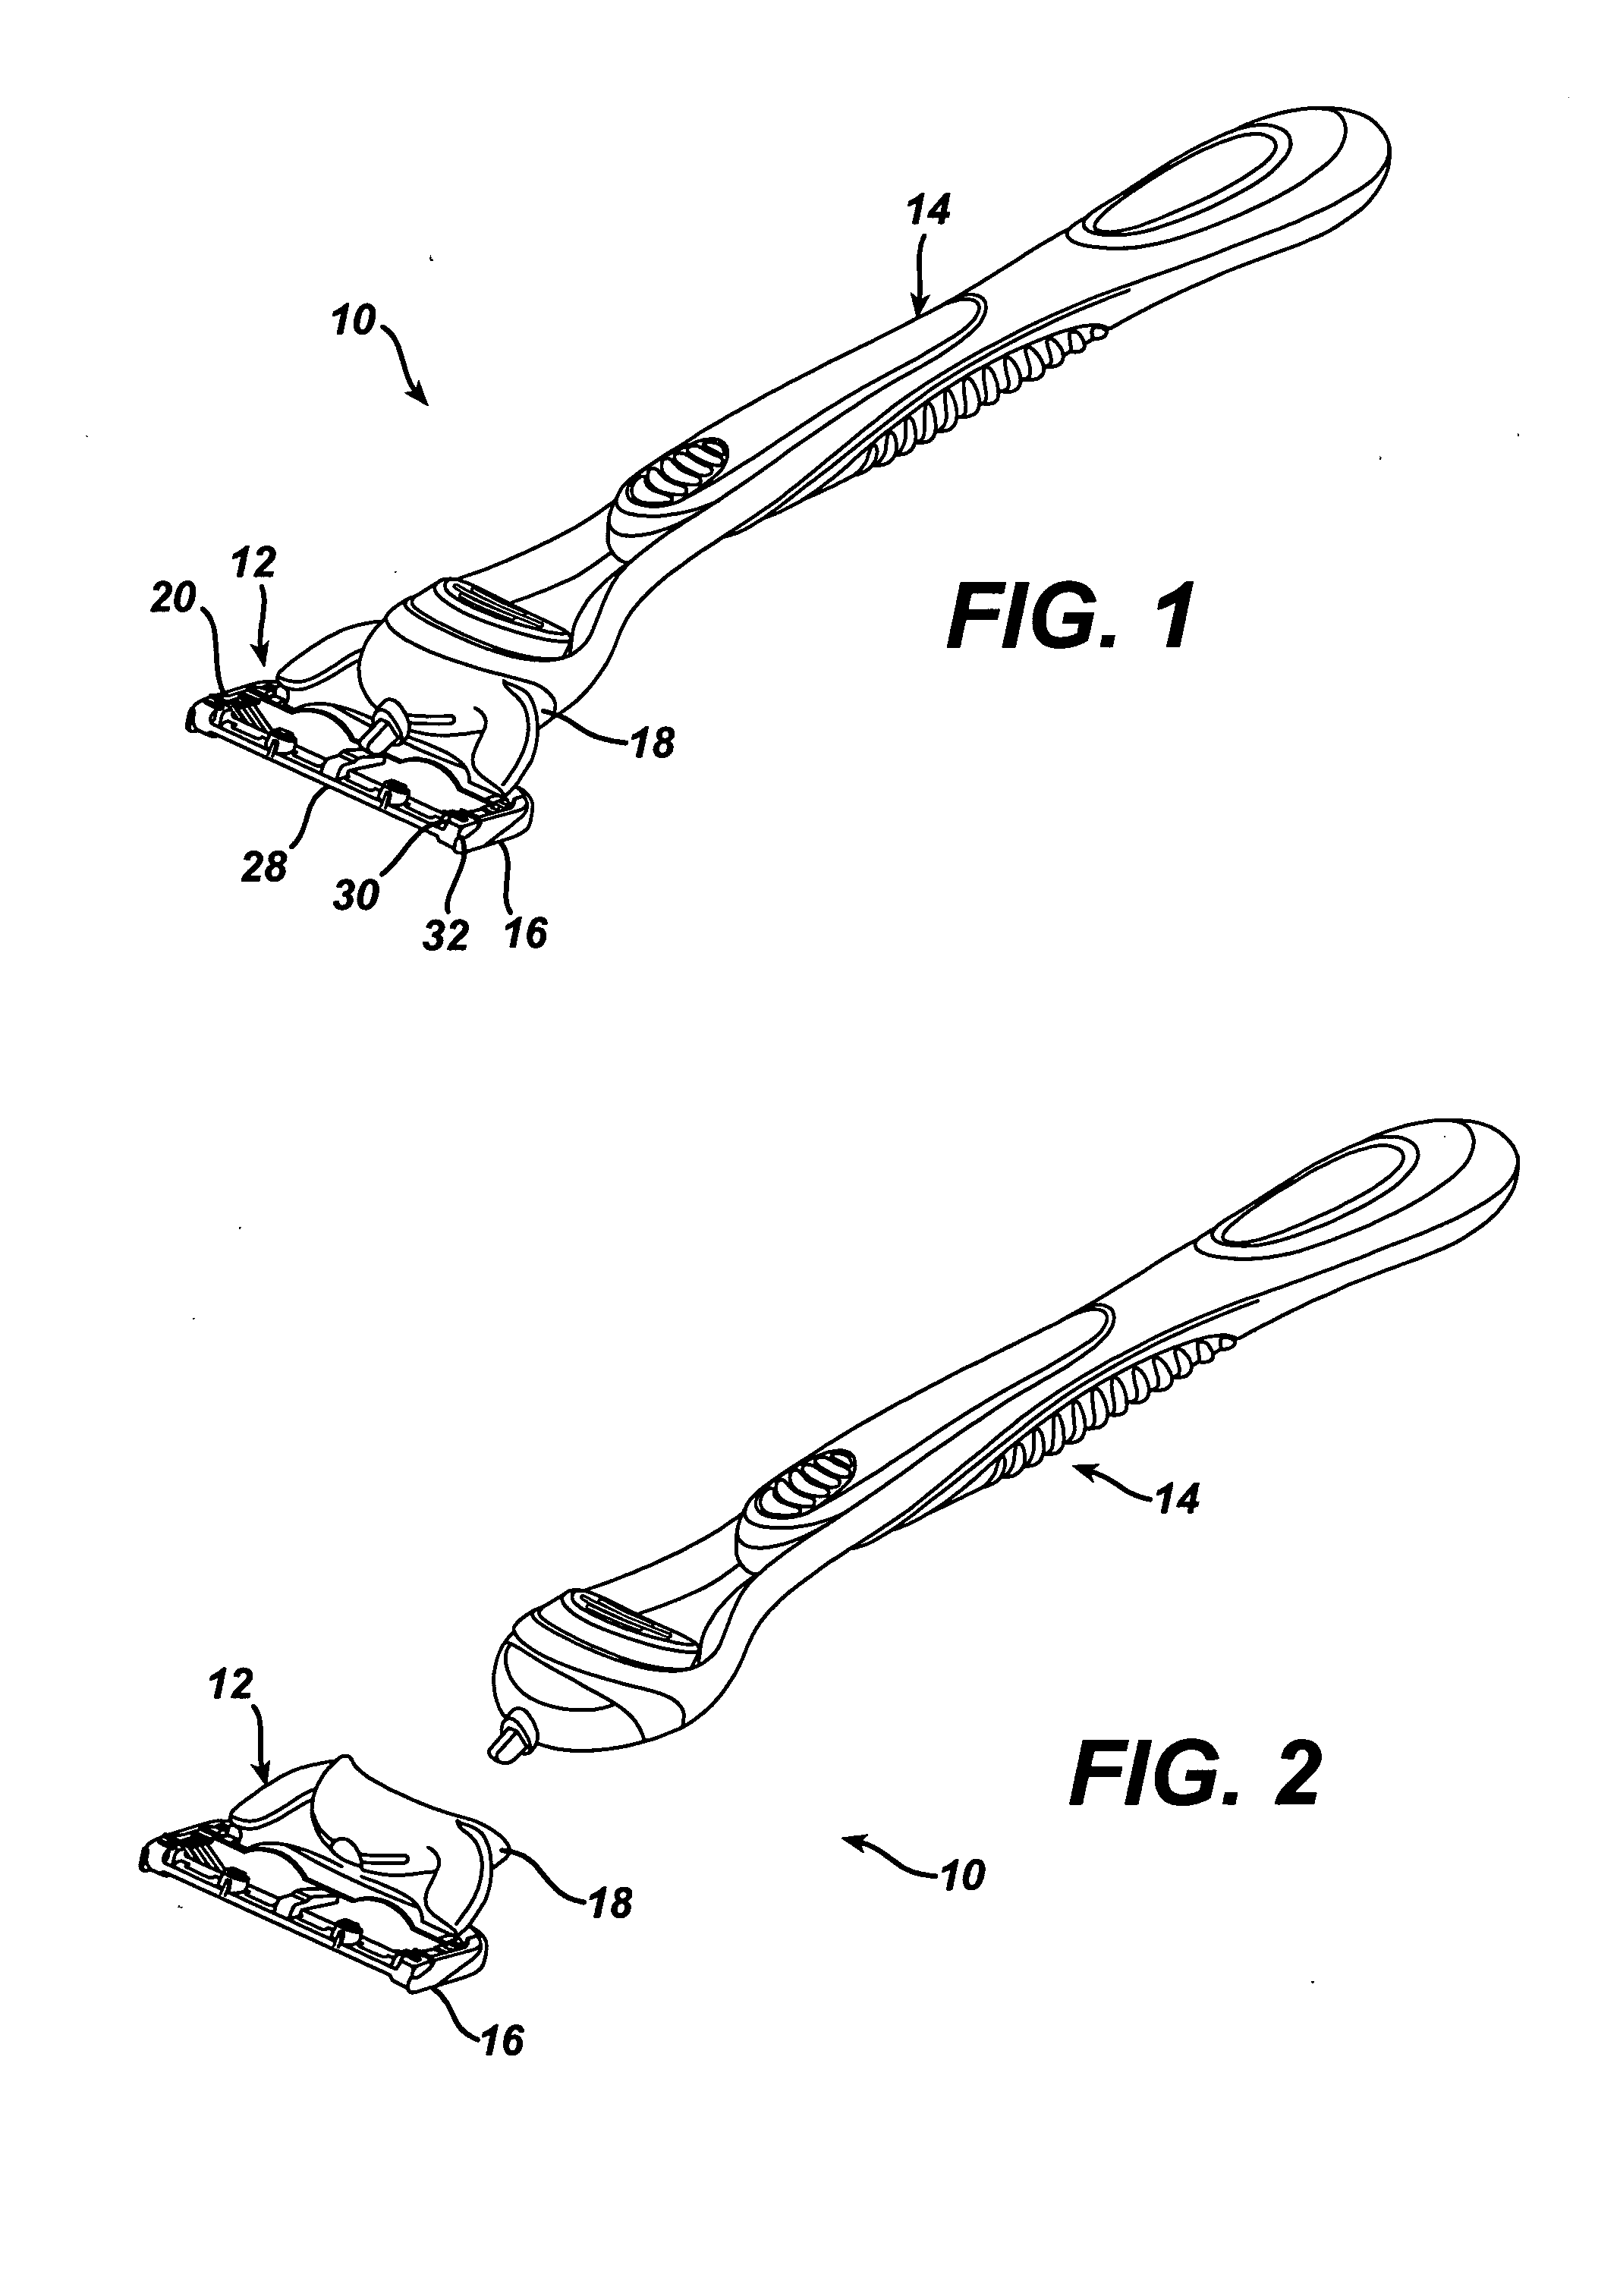 Shaving razors and other hair cutting assemblies